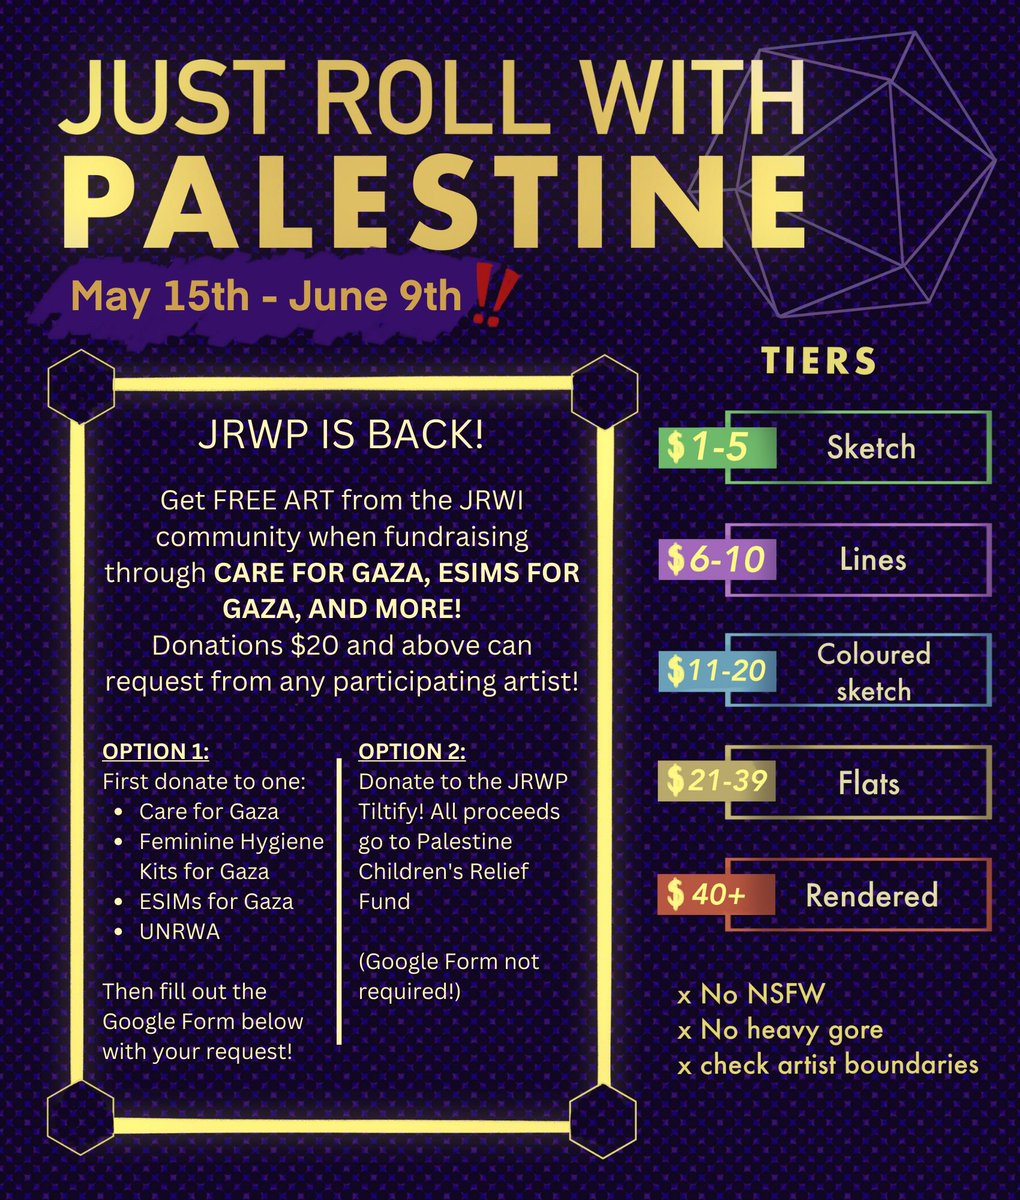 We are extending the #JustRollWithPalestine deadline by two weeks‼️ You can now donate and send in requests for art until June 9th, for more information see the qrted thread! Thank you all for your support so far GO DONATE!!